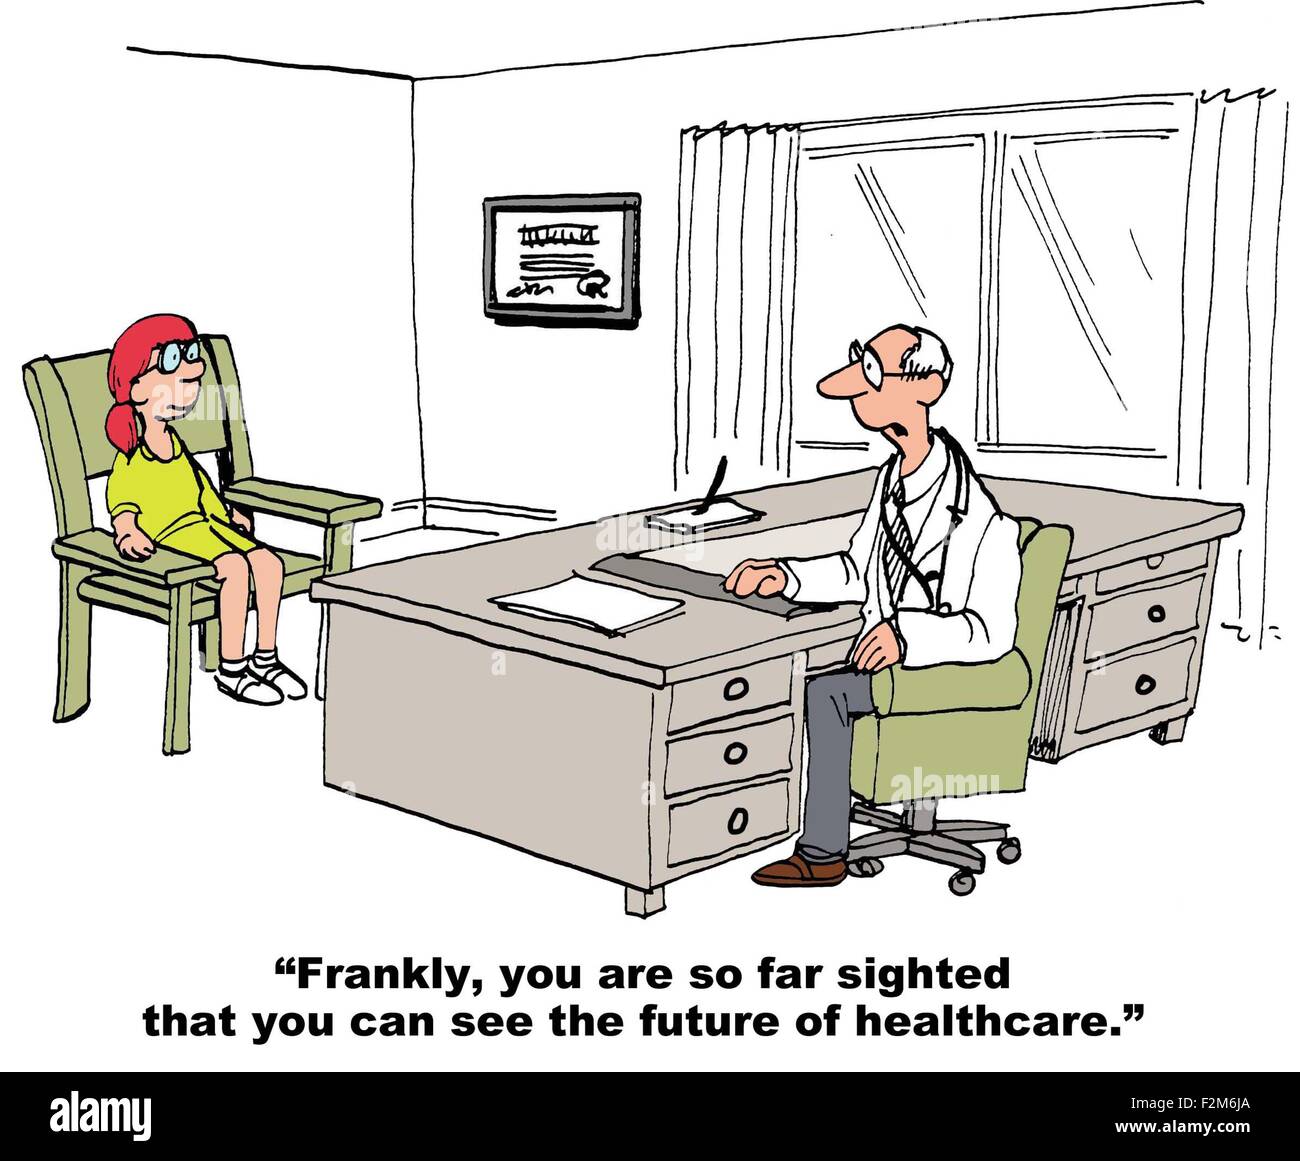 Healthcare cartoon showing doctor saying to girl, 'Frankly, you are so far sighted that you can see the future of healthcare'. Stock Photo